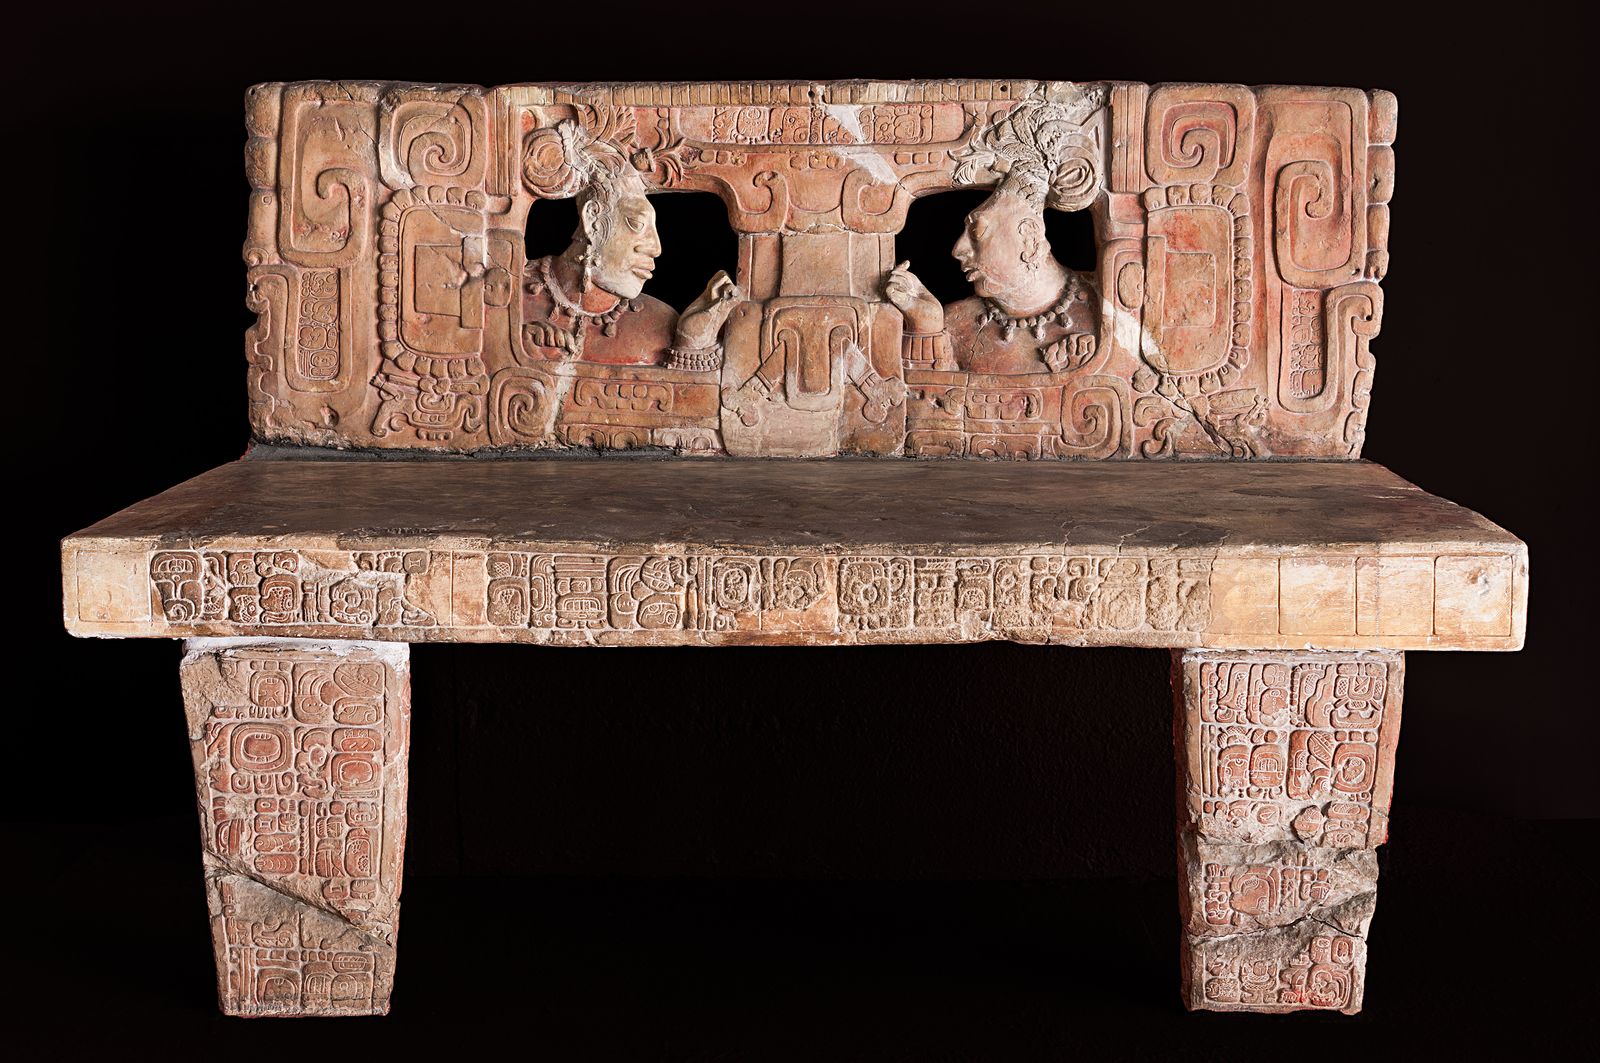 Rarely Seen Ancient Maya Masterpieces Go on View at the Met